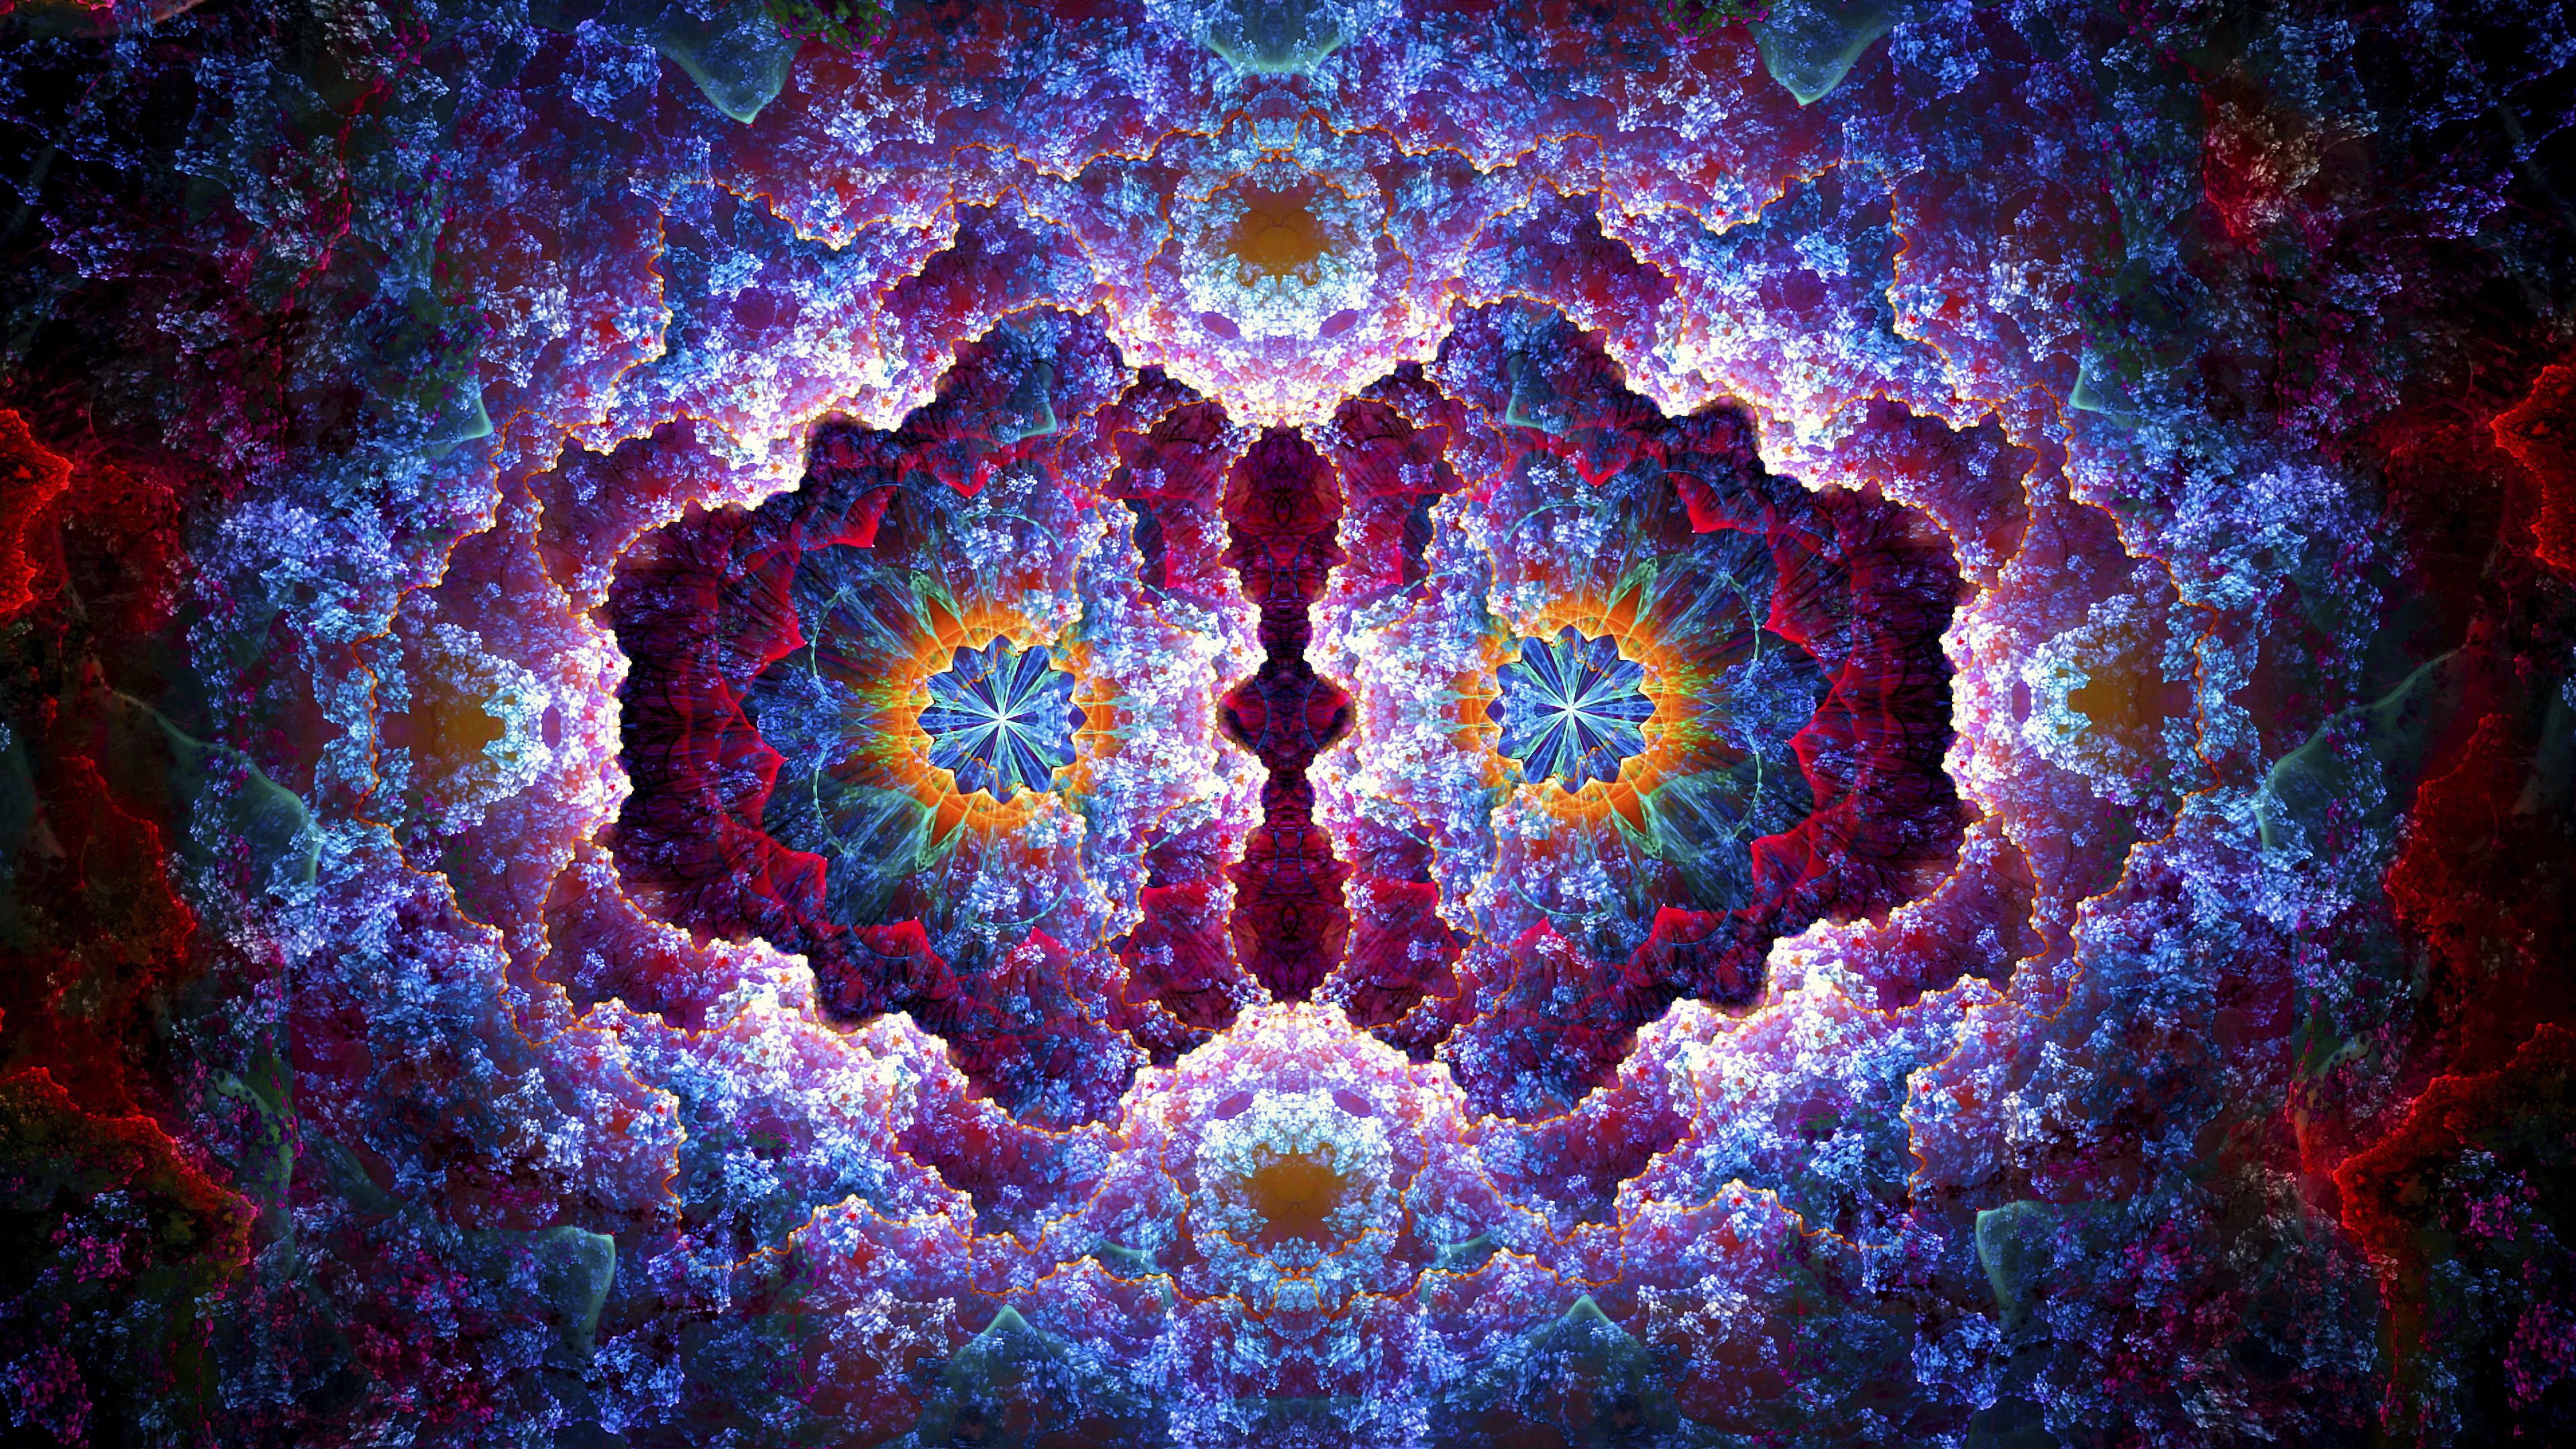 Fractal Pattern Bright Colorful Glow